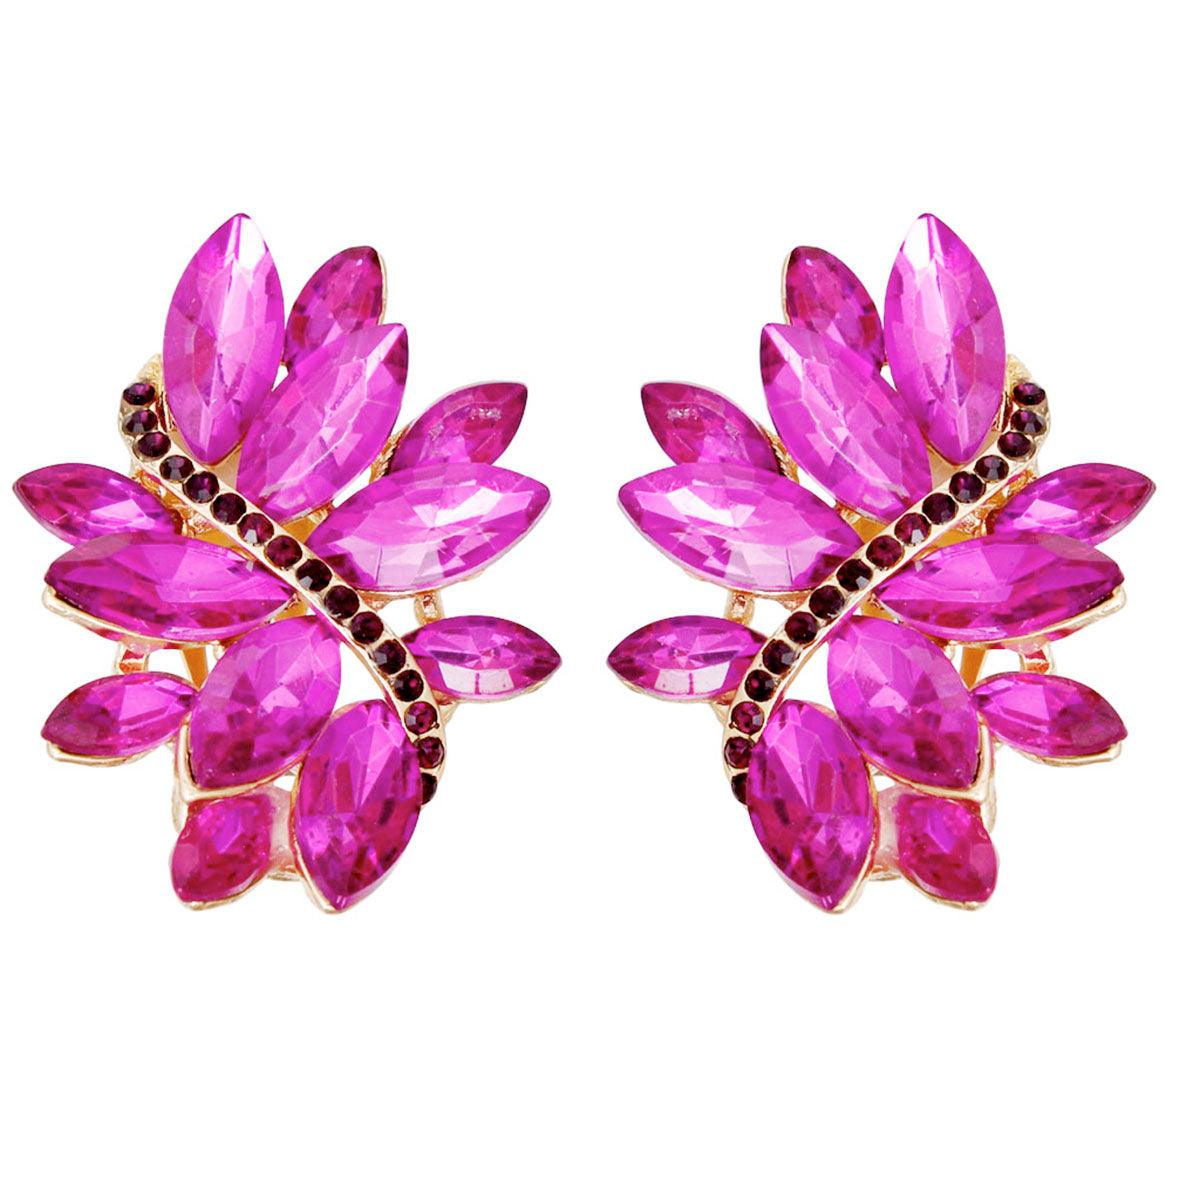 Marquise Studs: Fashionable Purple Earrings for Elegant Style